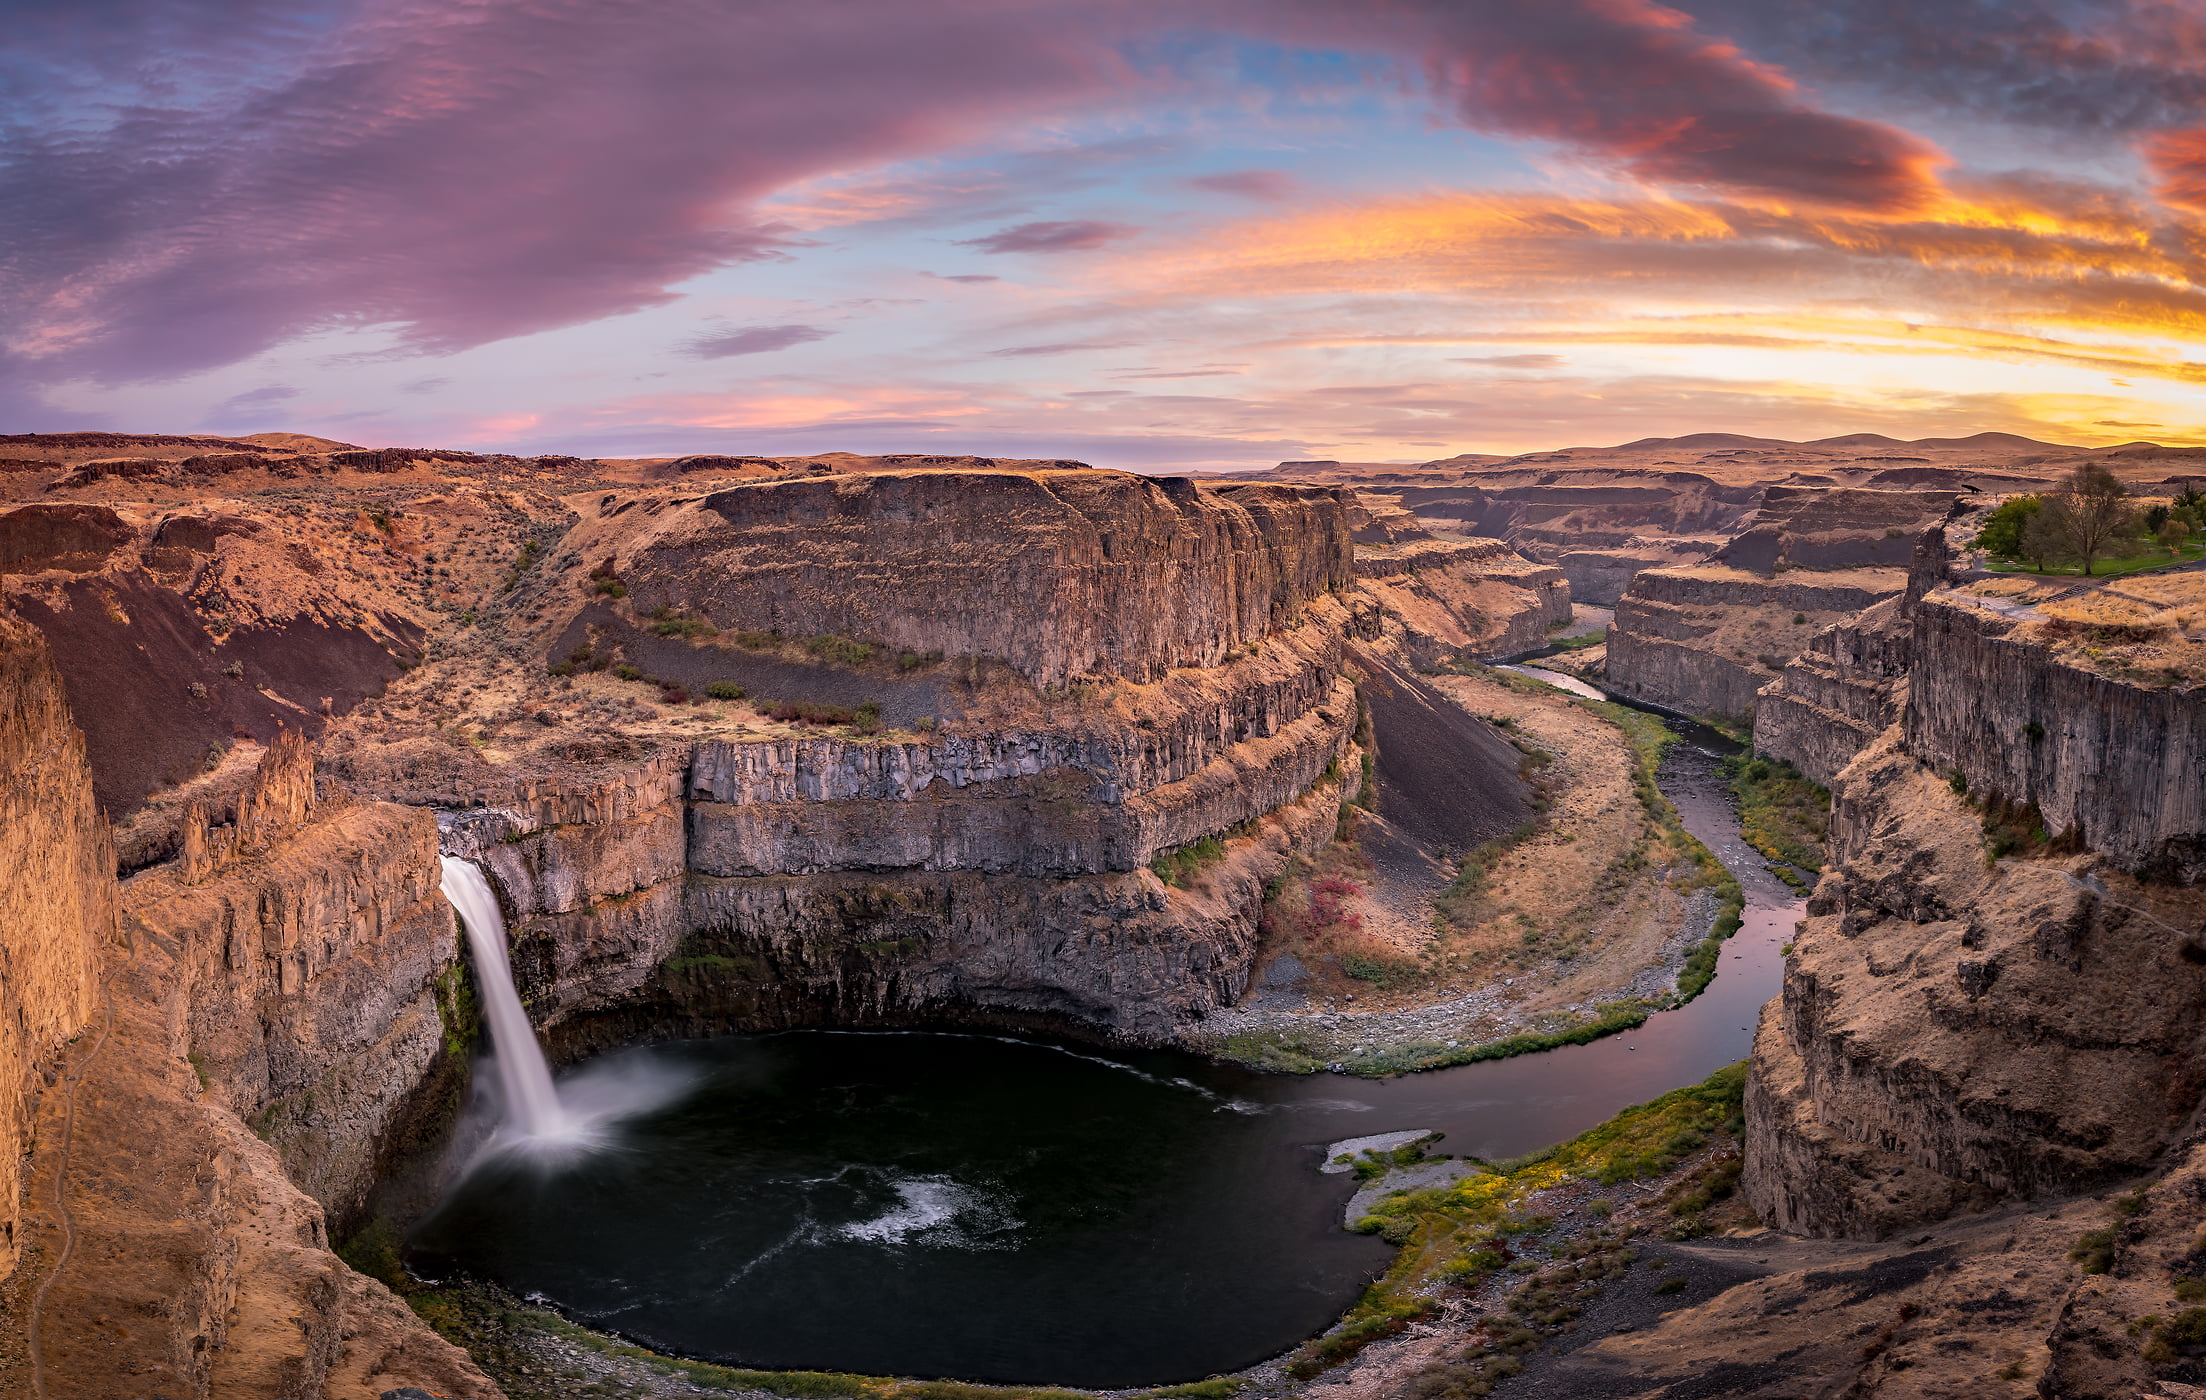 140 megapixels! A very high resolution, large-format VAST photo print of a canyon with a waterfall; landscape photograph created by Justin Katz in Palouse Falls, Washington.